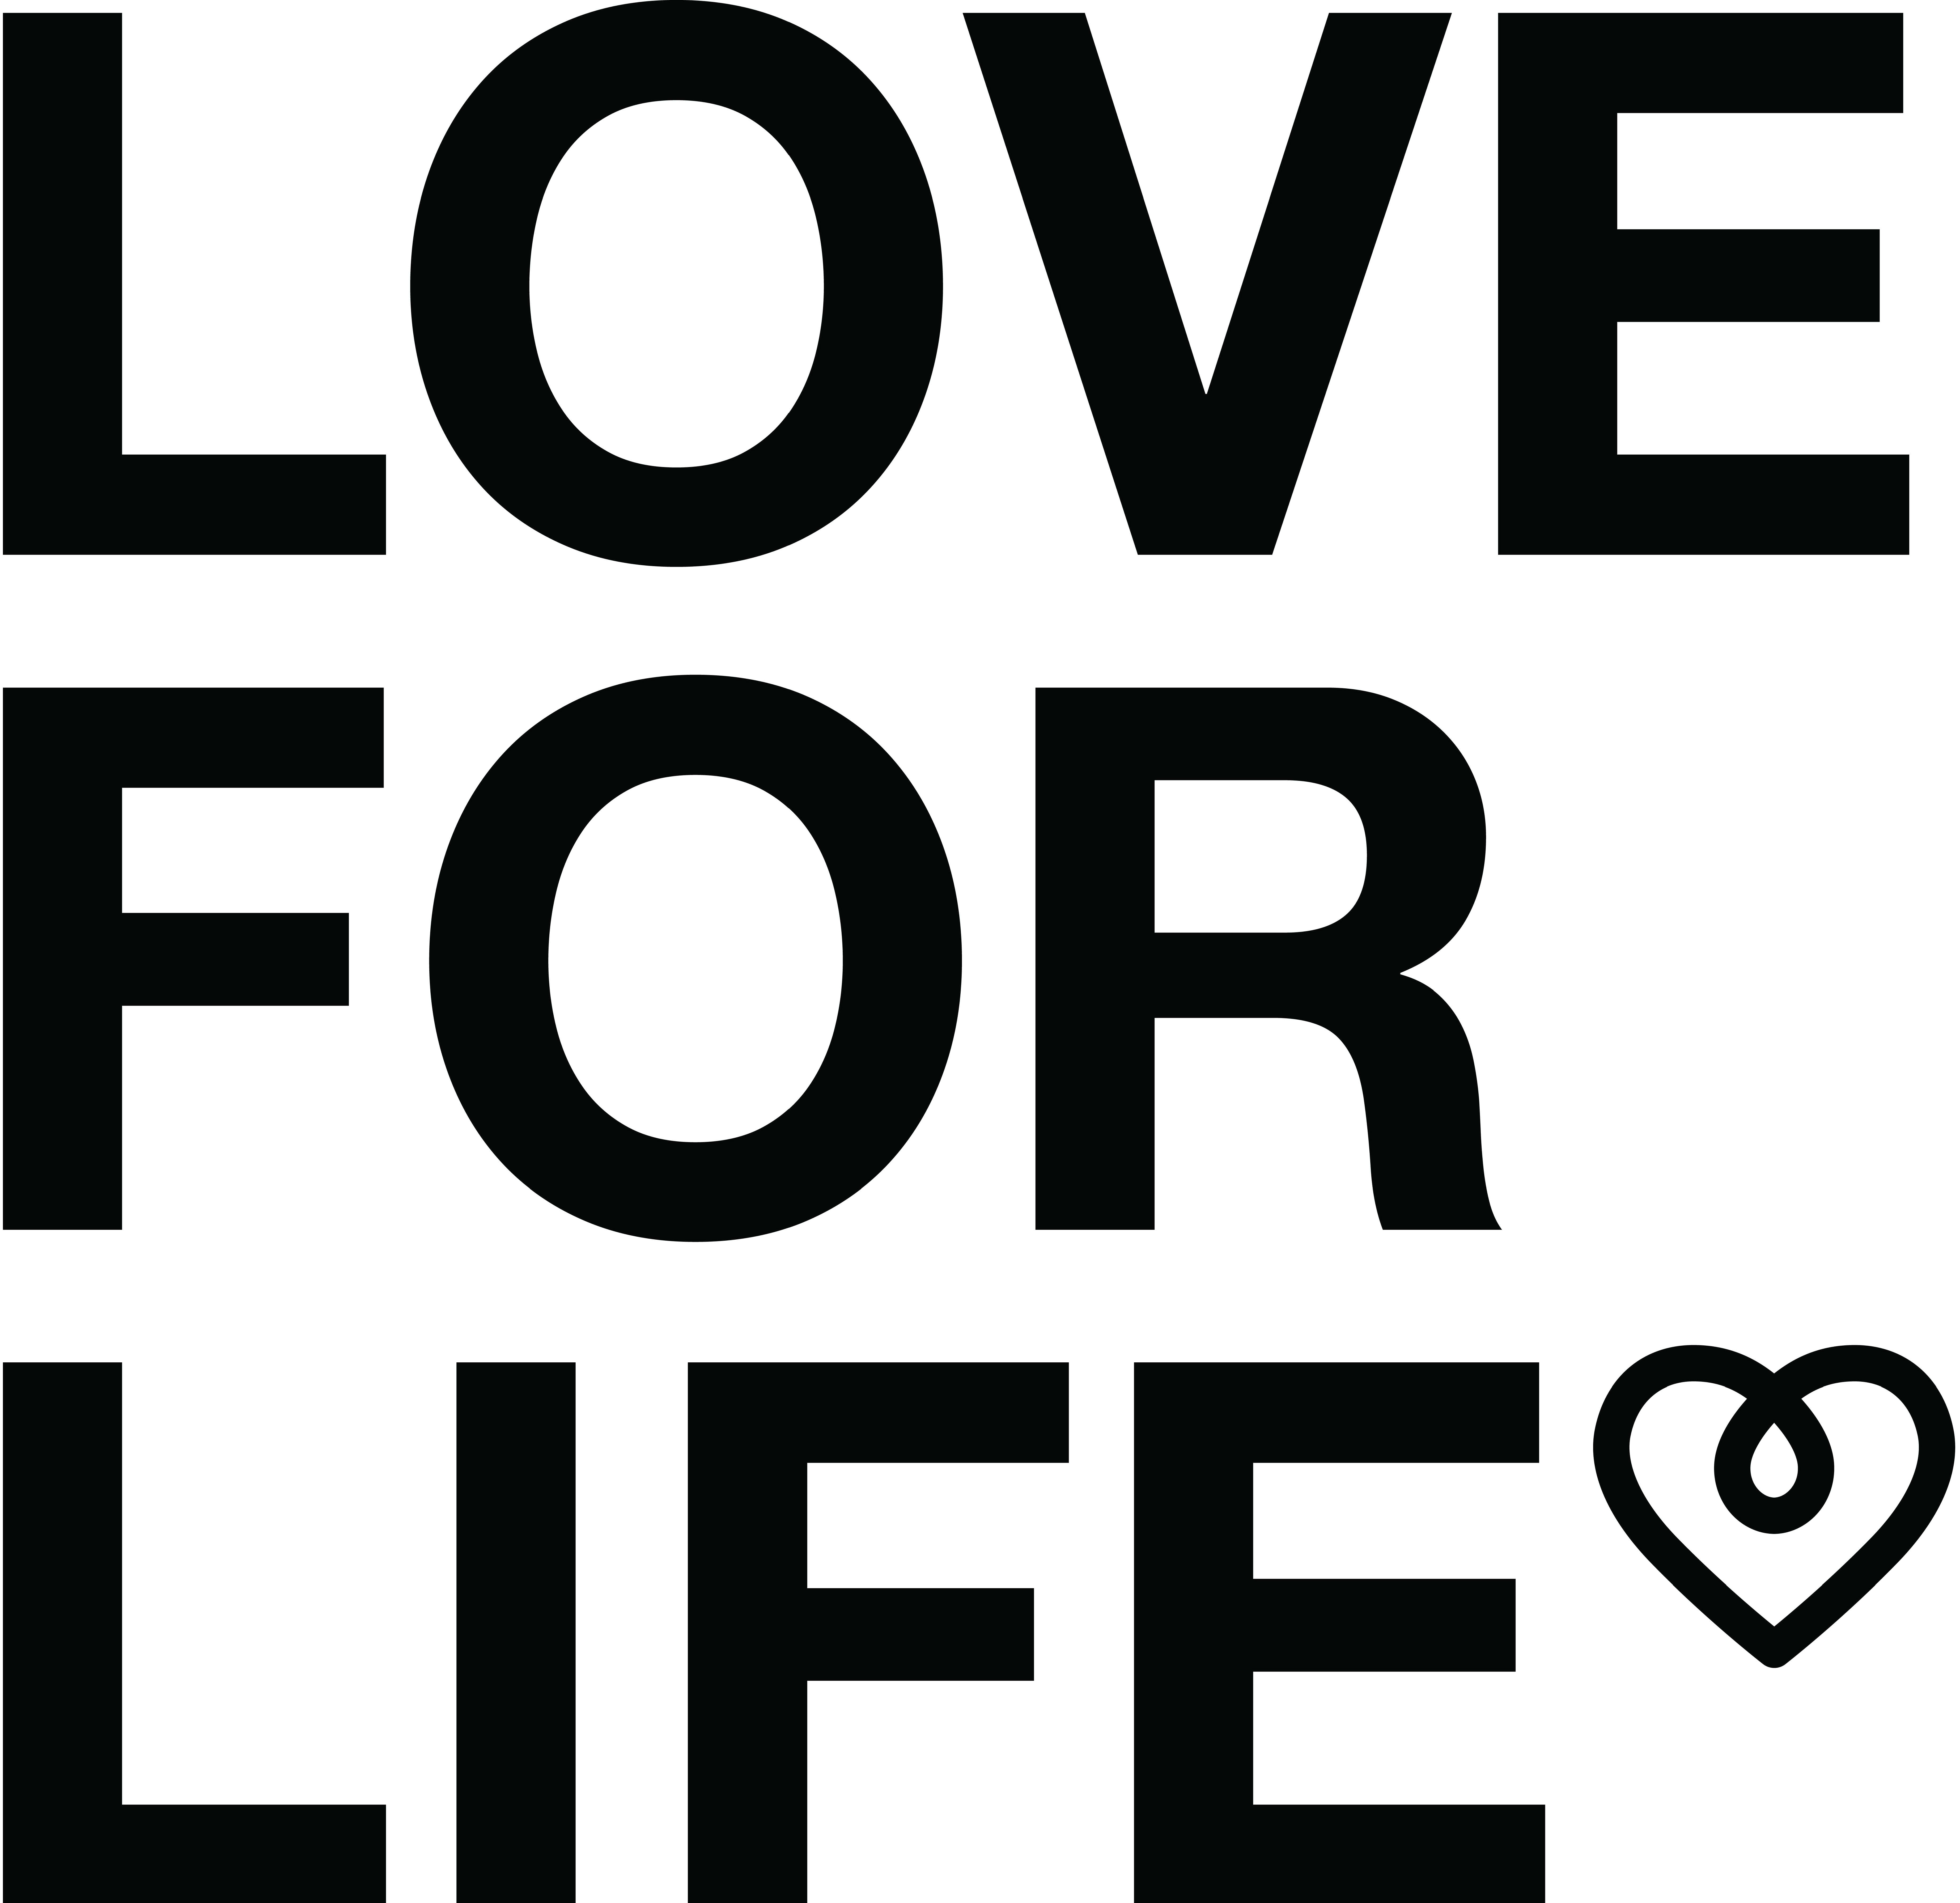 Love for Life